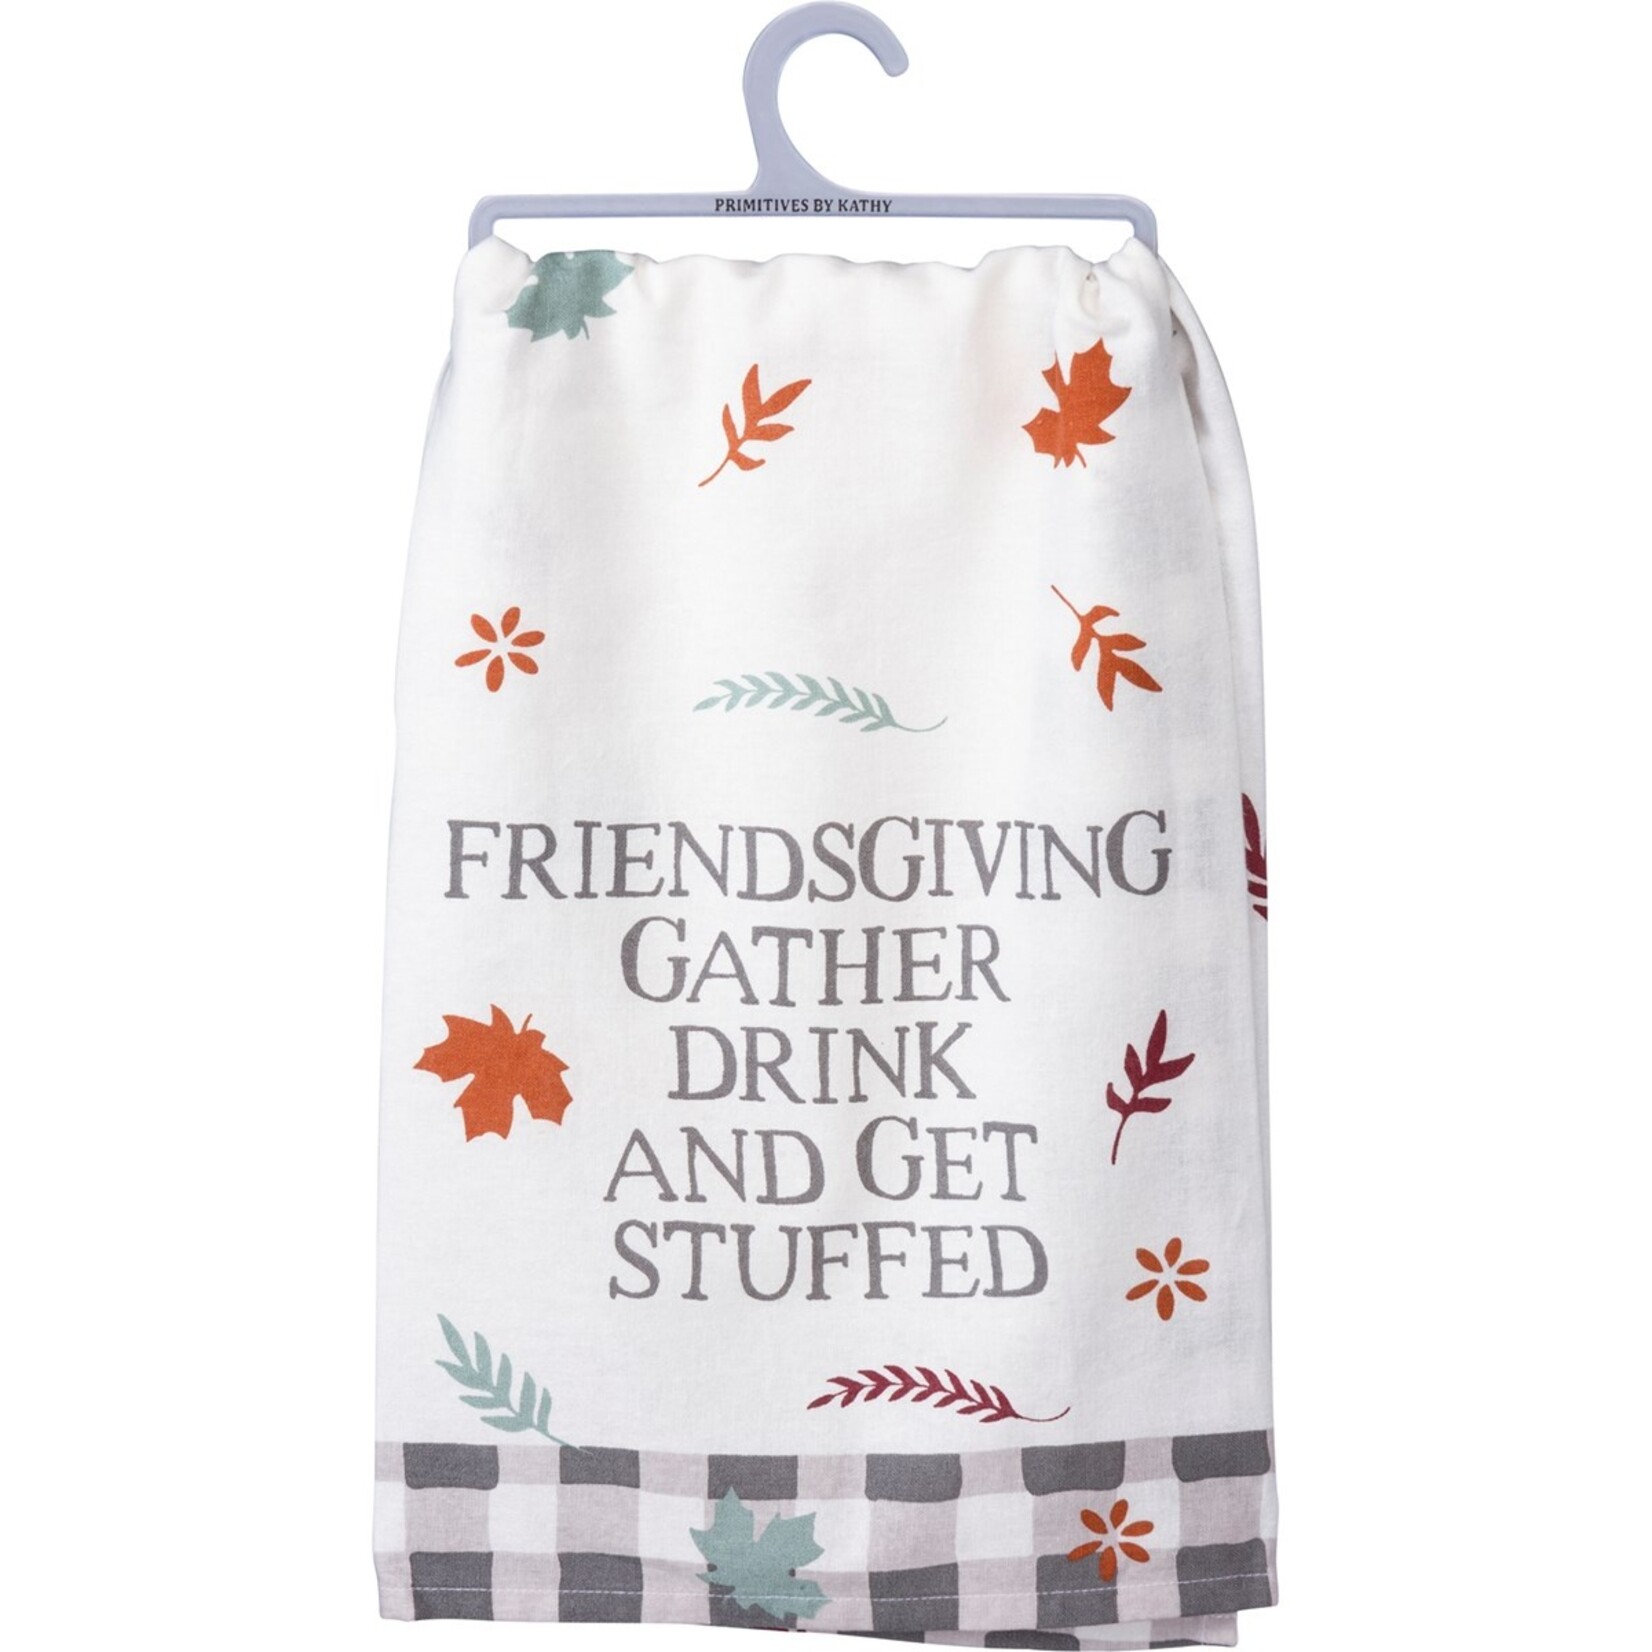 Primitives by Kathy Primitives by Kathy-Friendsgiving Gather Get Stuffed Kitchen Towel